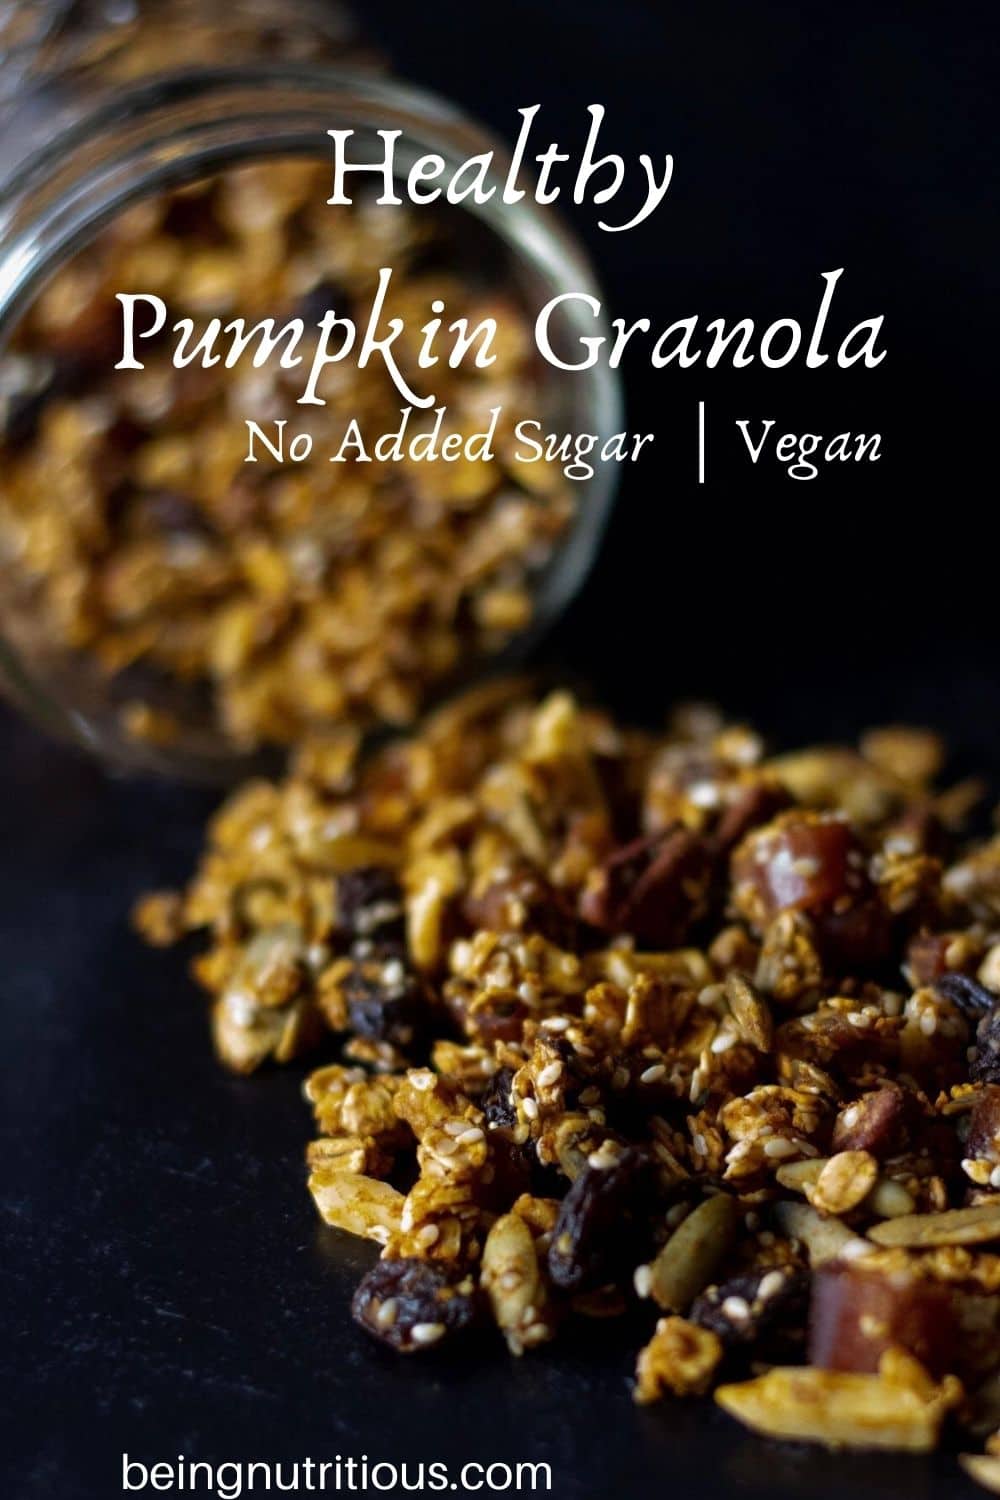 Granola spilling out of a Mason jar on a black background with text overlay: Heart Healthy Pumpkin Granola, no added sugar, vegan.